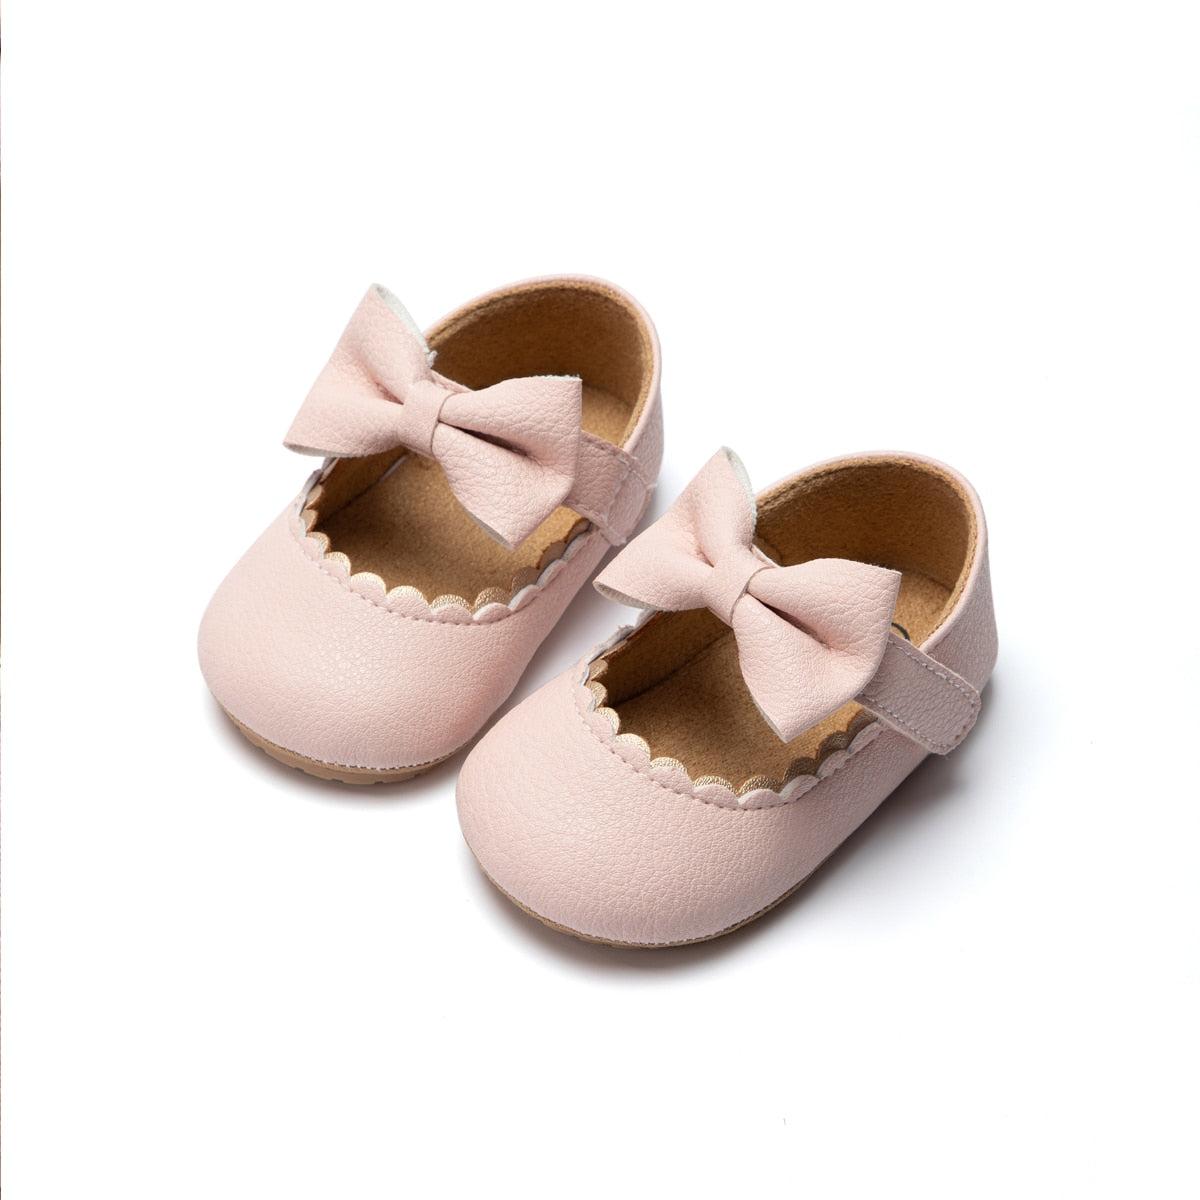 Infant bow Mary Janes shoes.